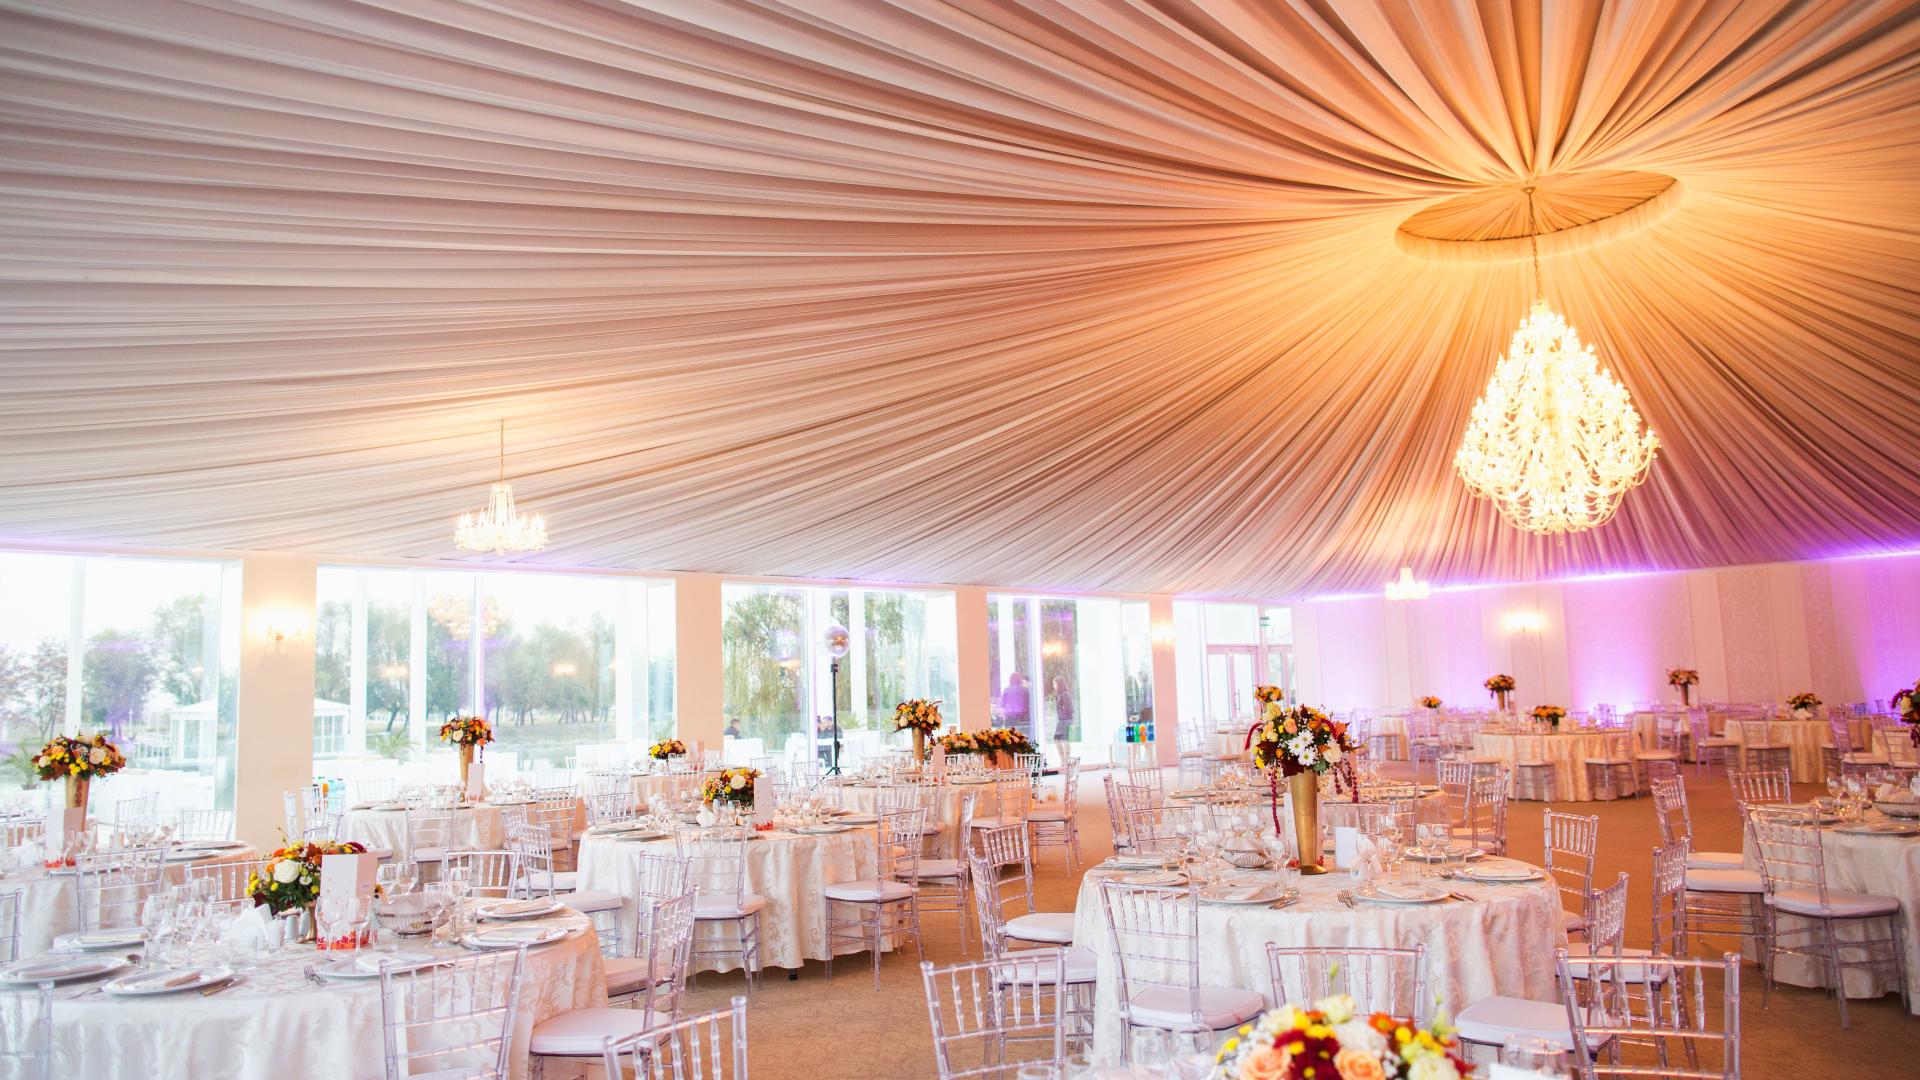 Wedding Venues for Rent in Williamsburg, NY